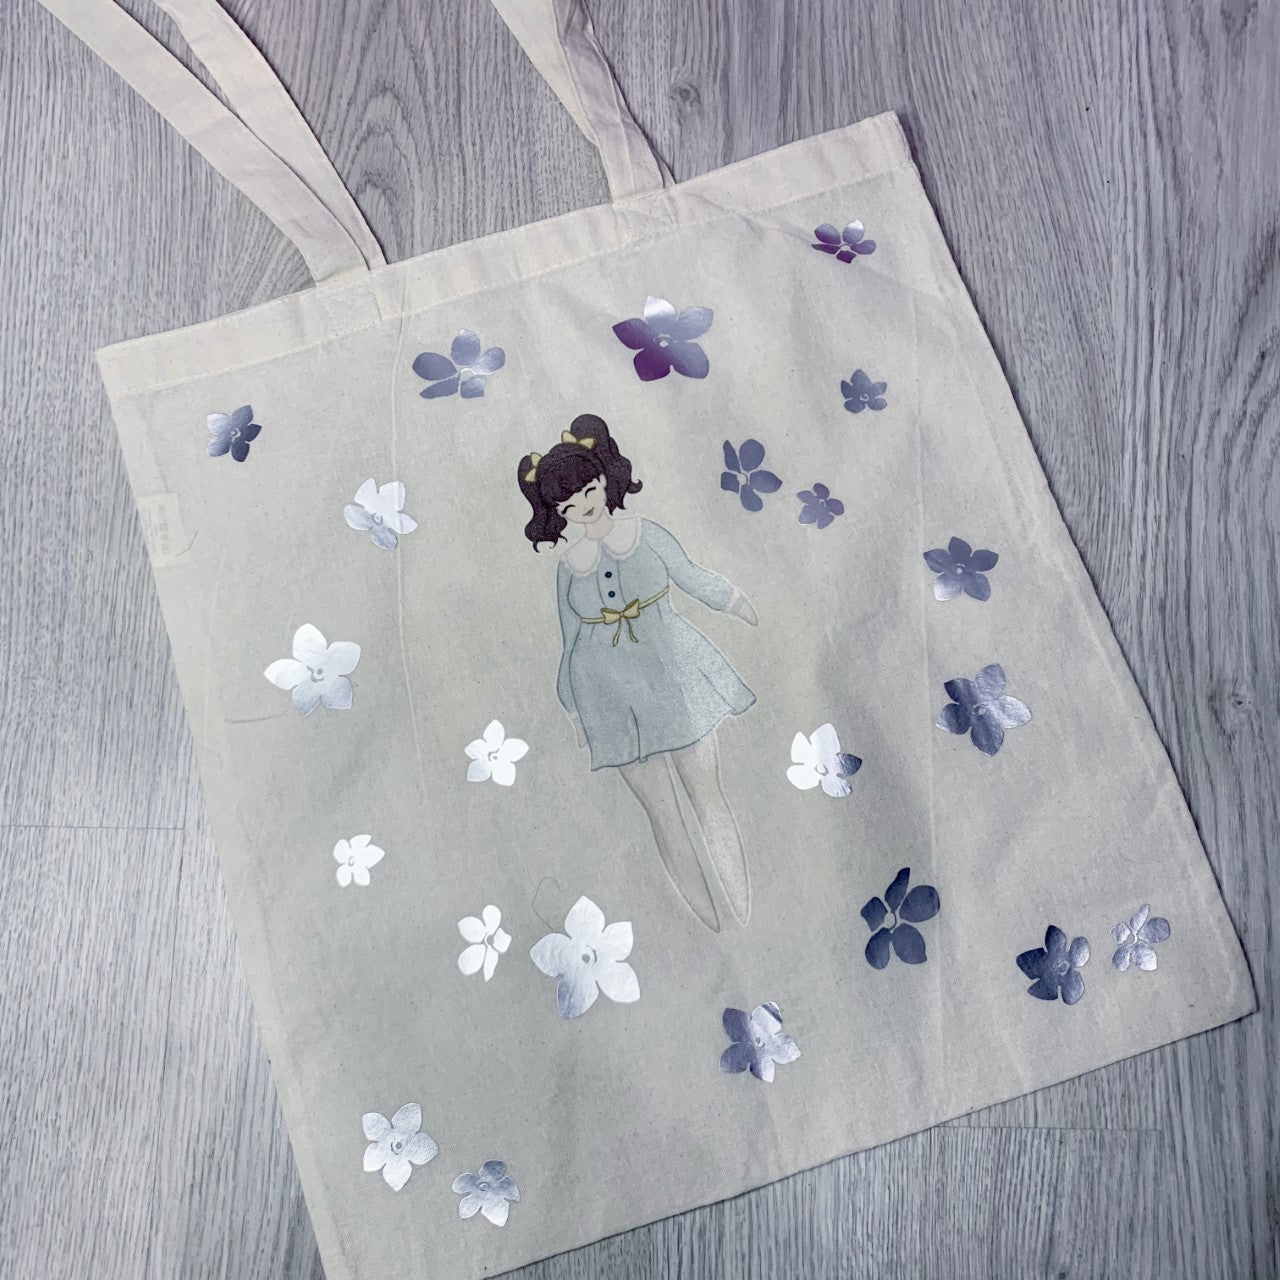 LIMITED - The Flower Girl Tote bag - with silver vinyl